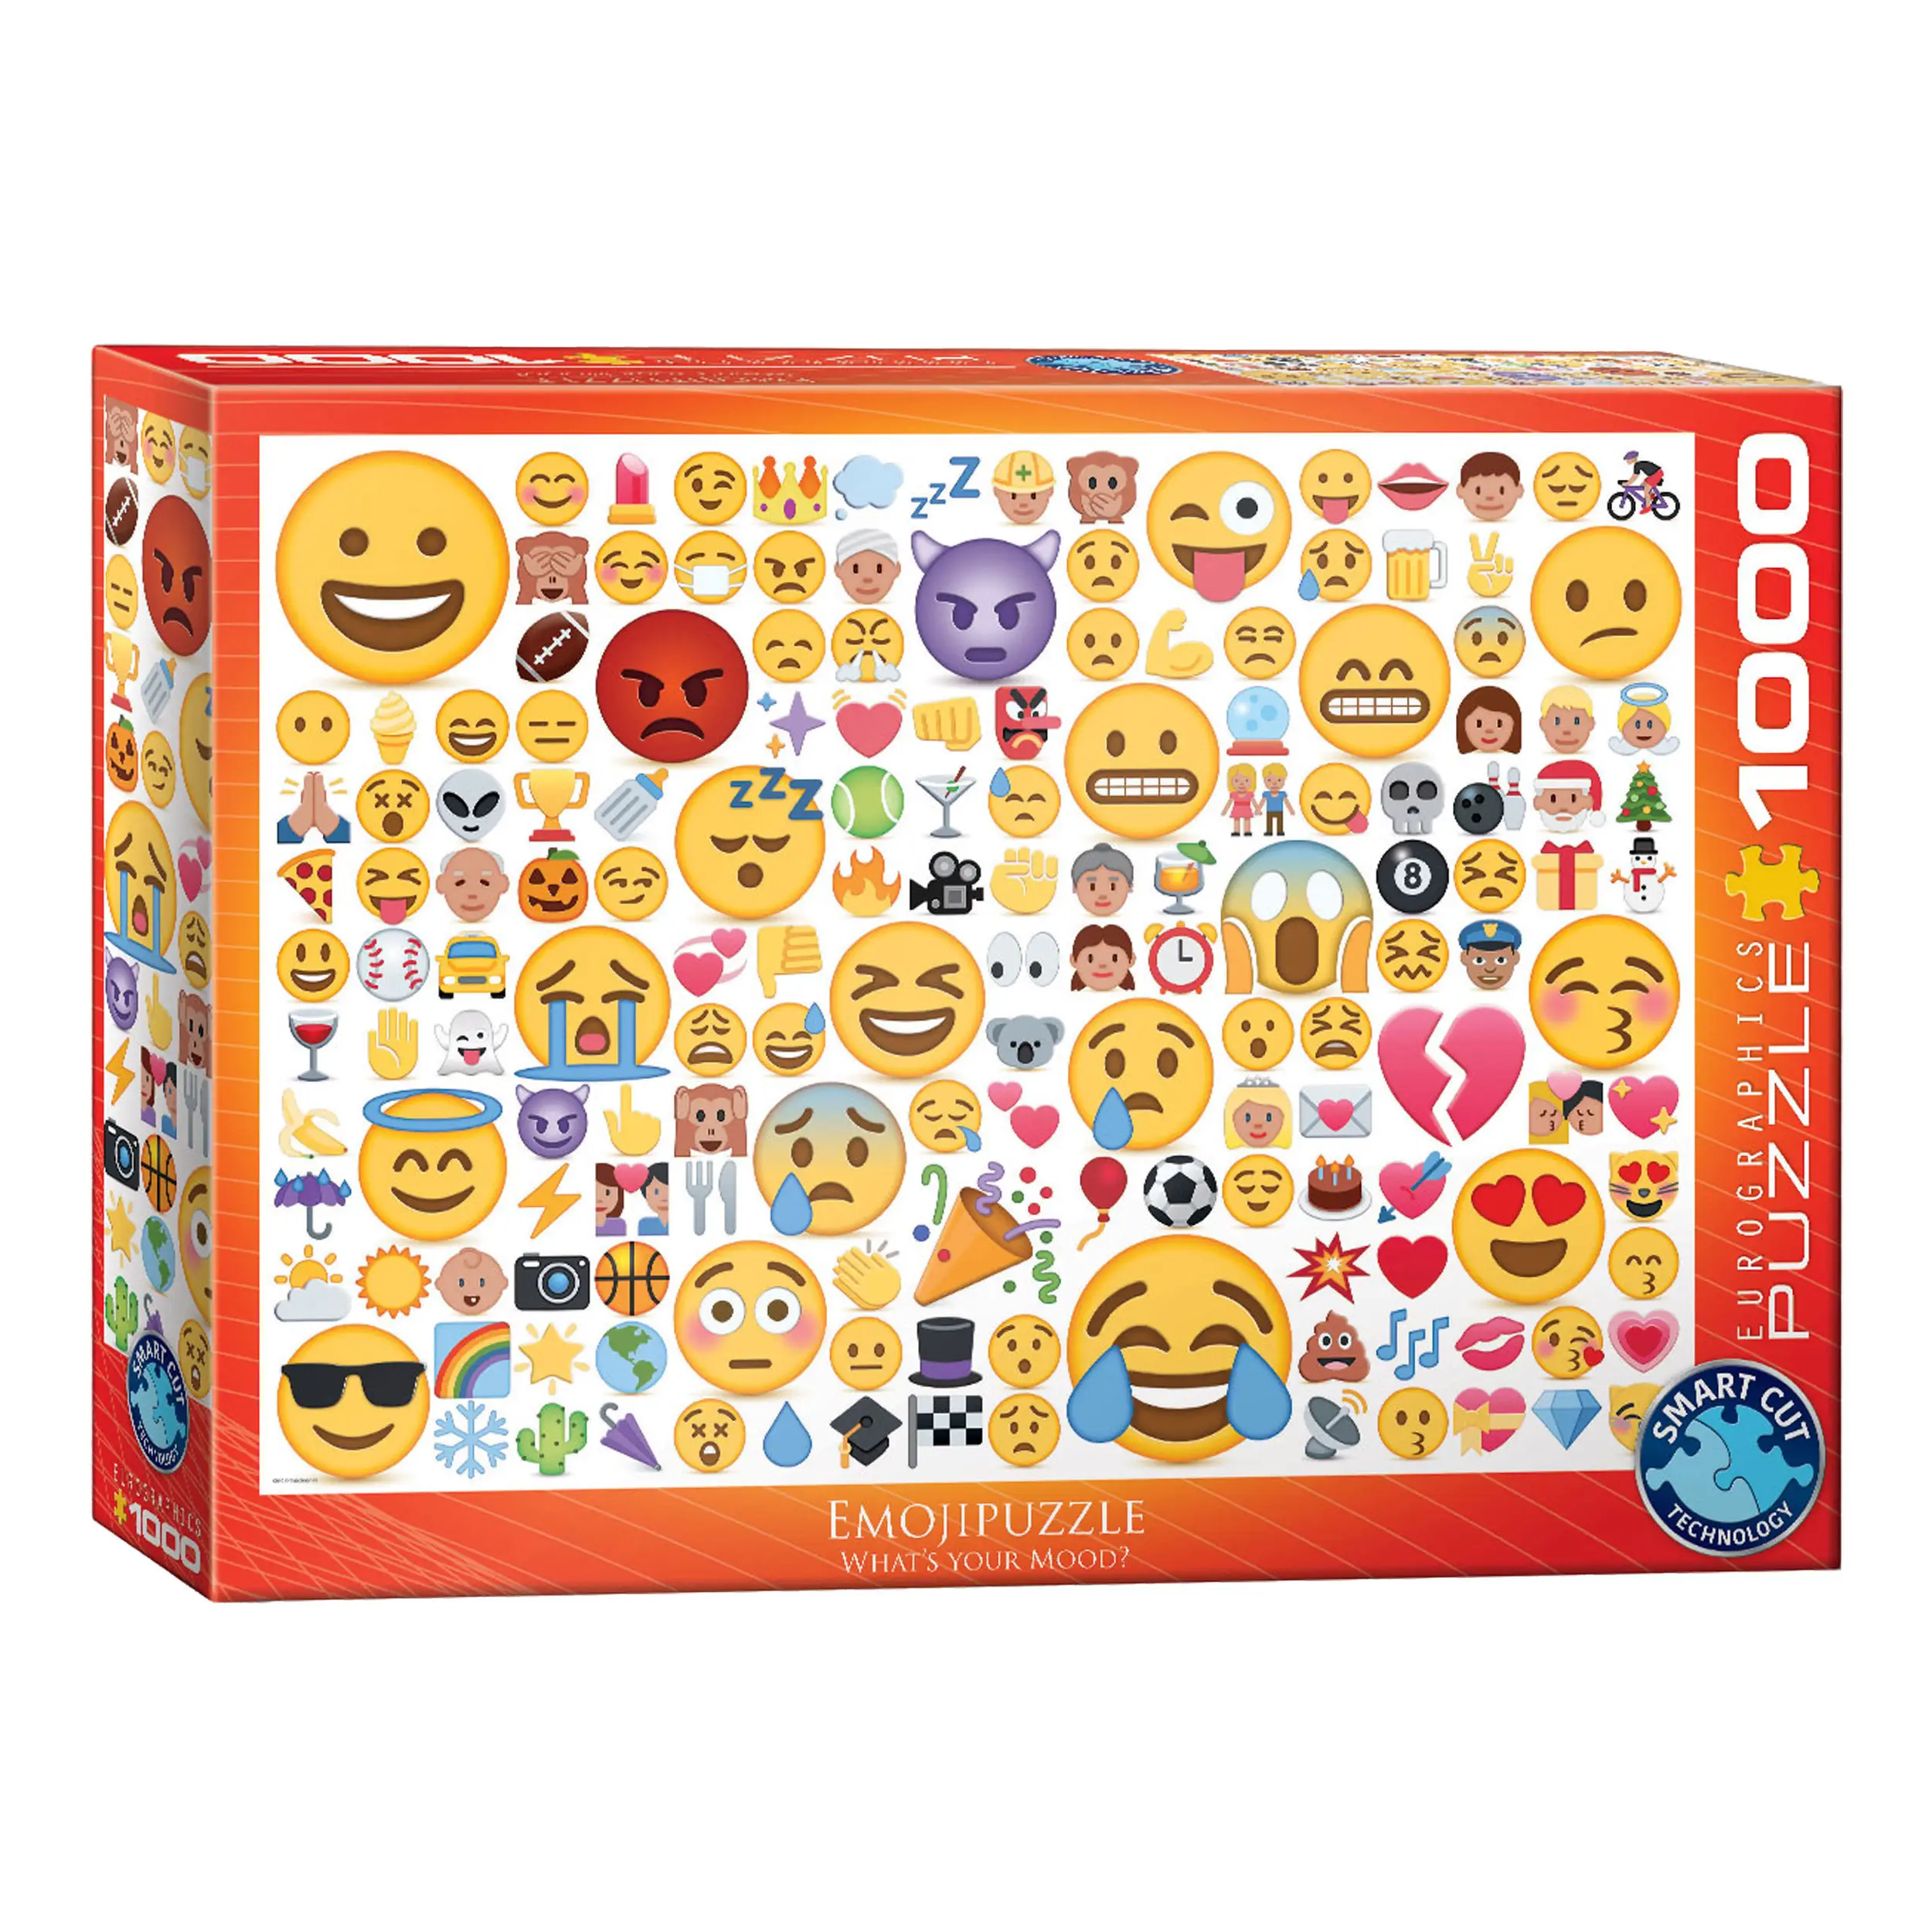 Whats your Mood Puzzle Emotipuzzle